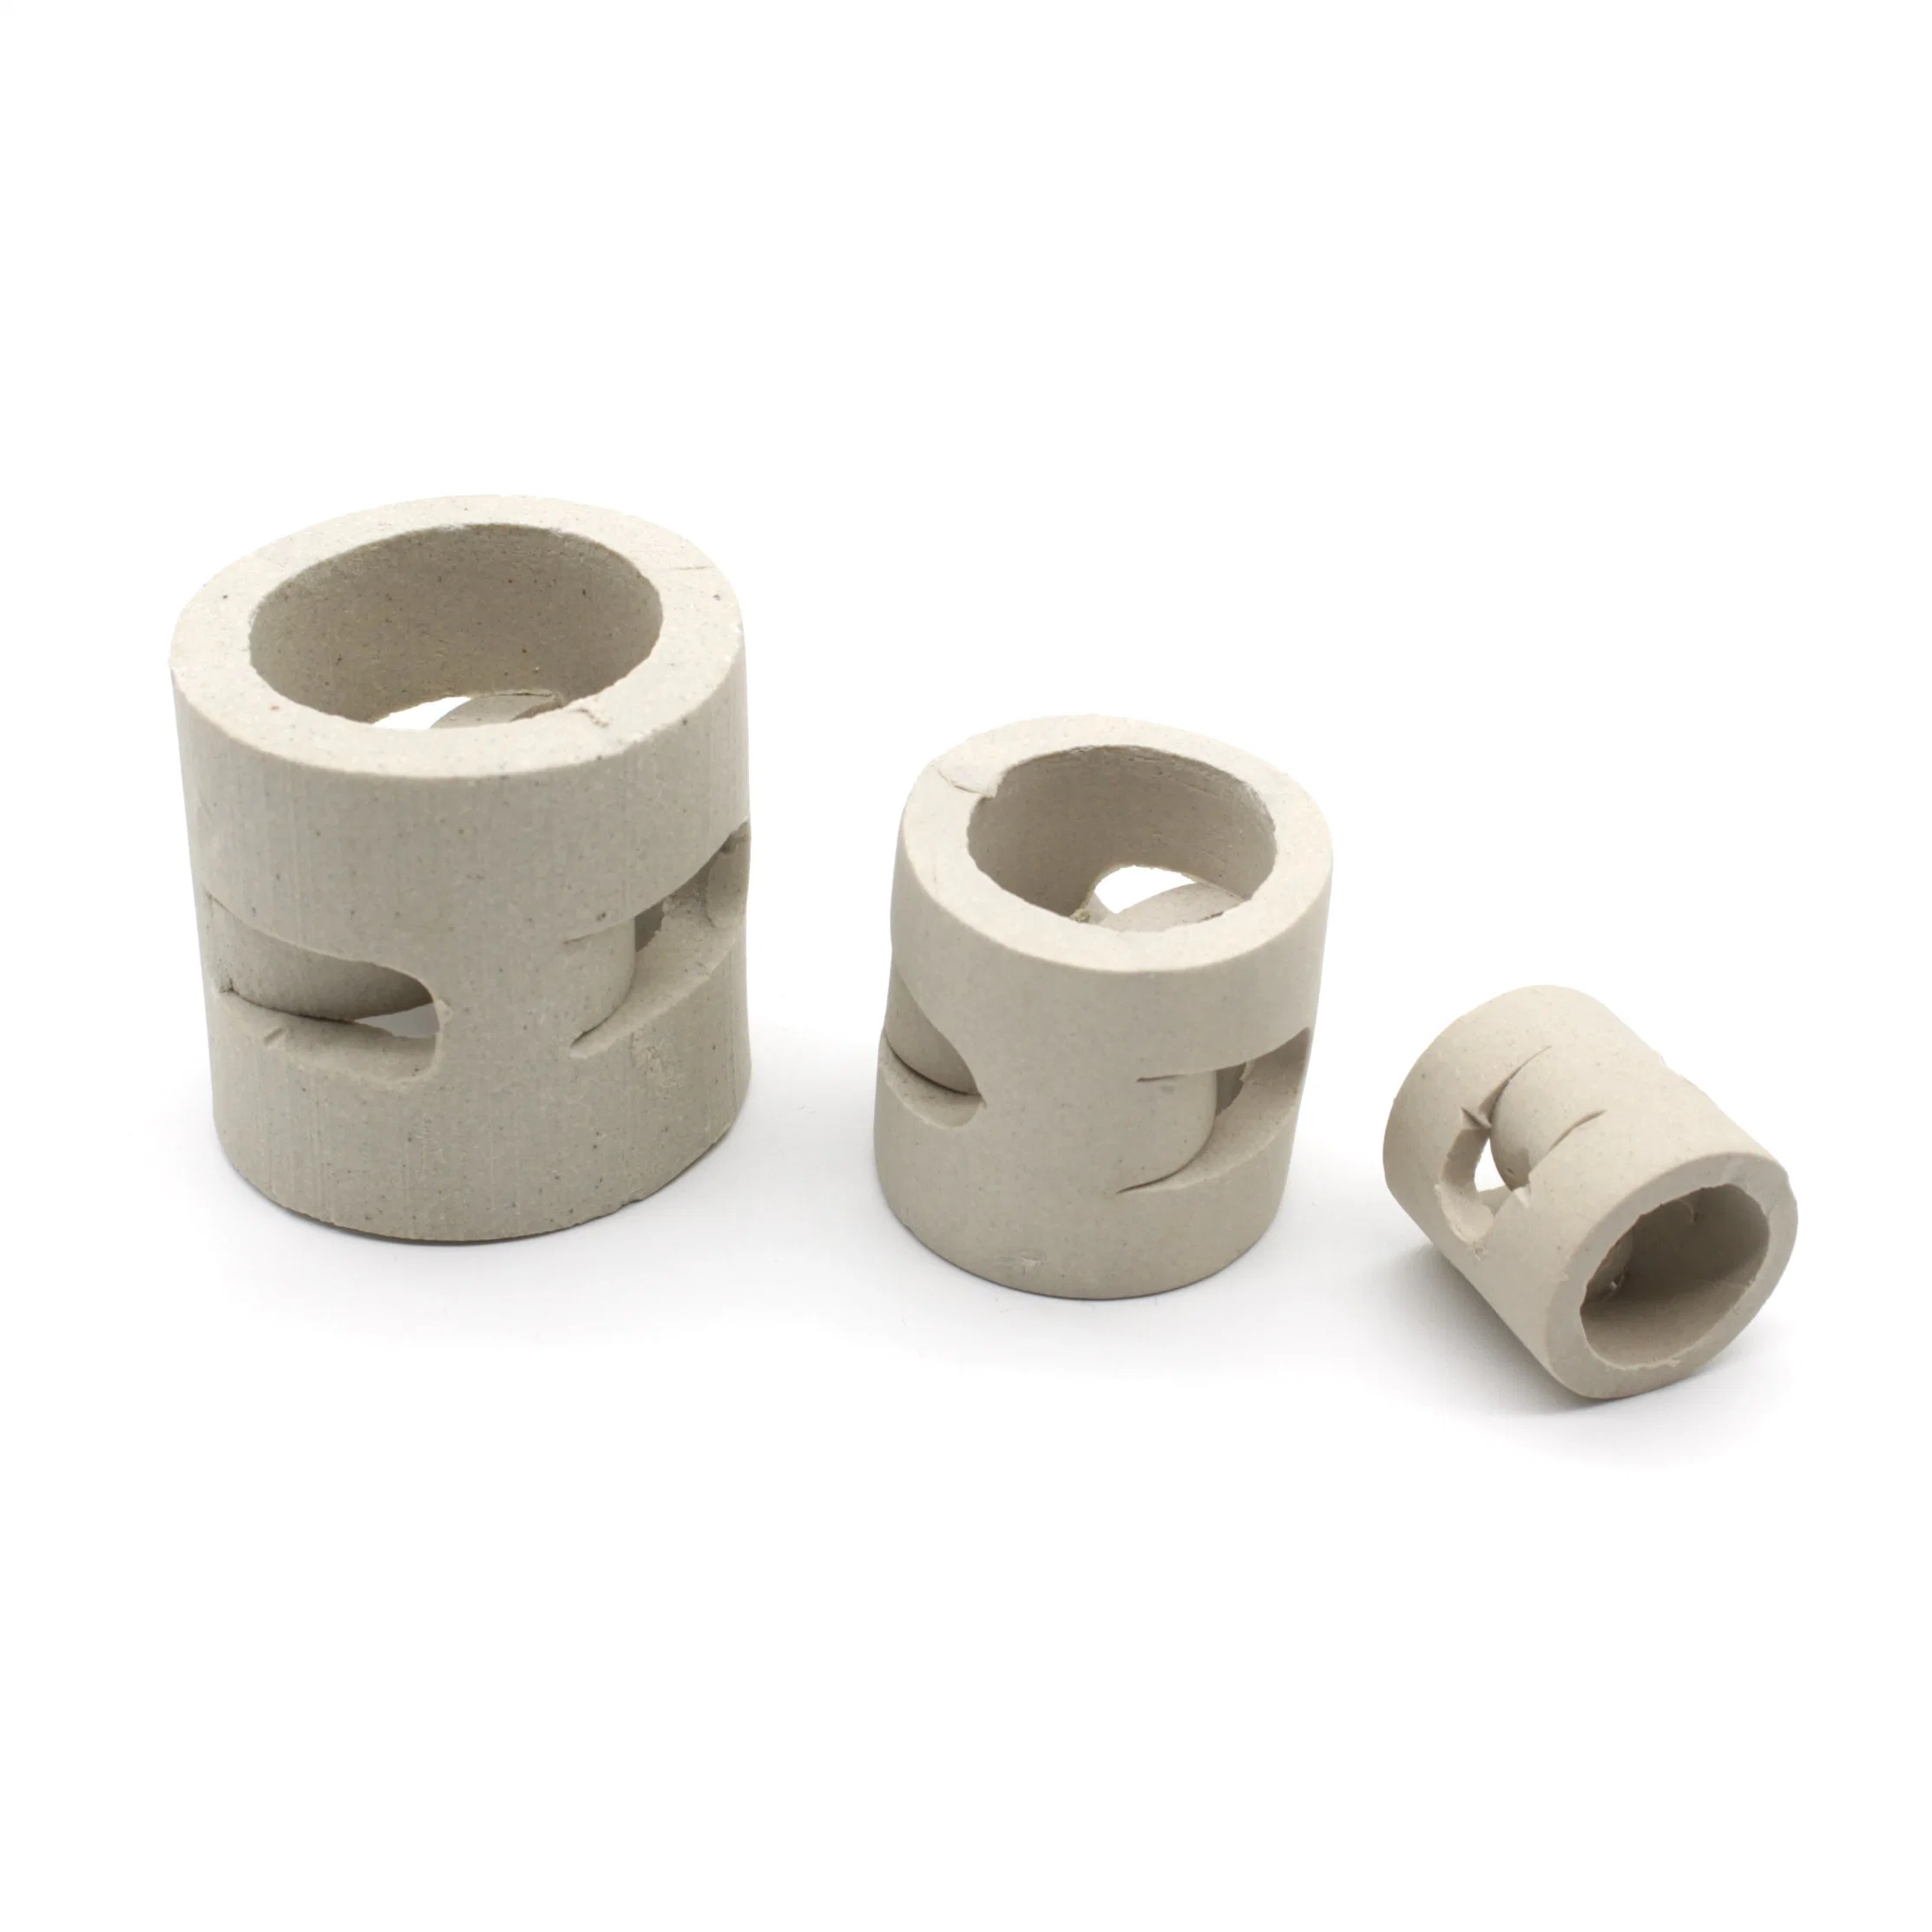 25mm Heat Resistance Ceramic Pall Ring Tower Packing